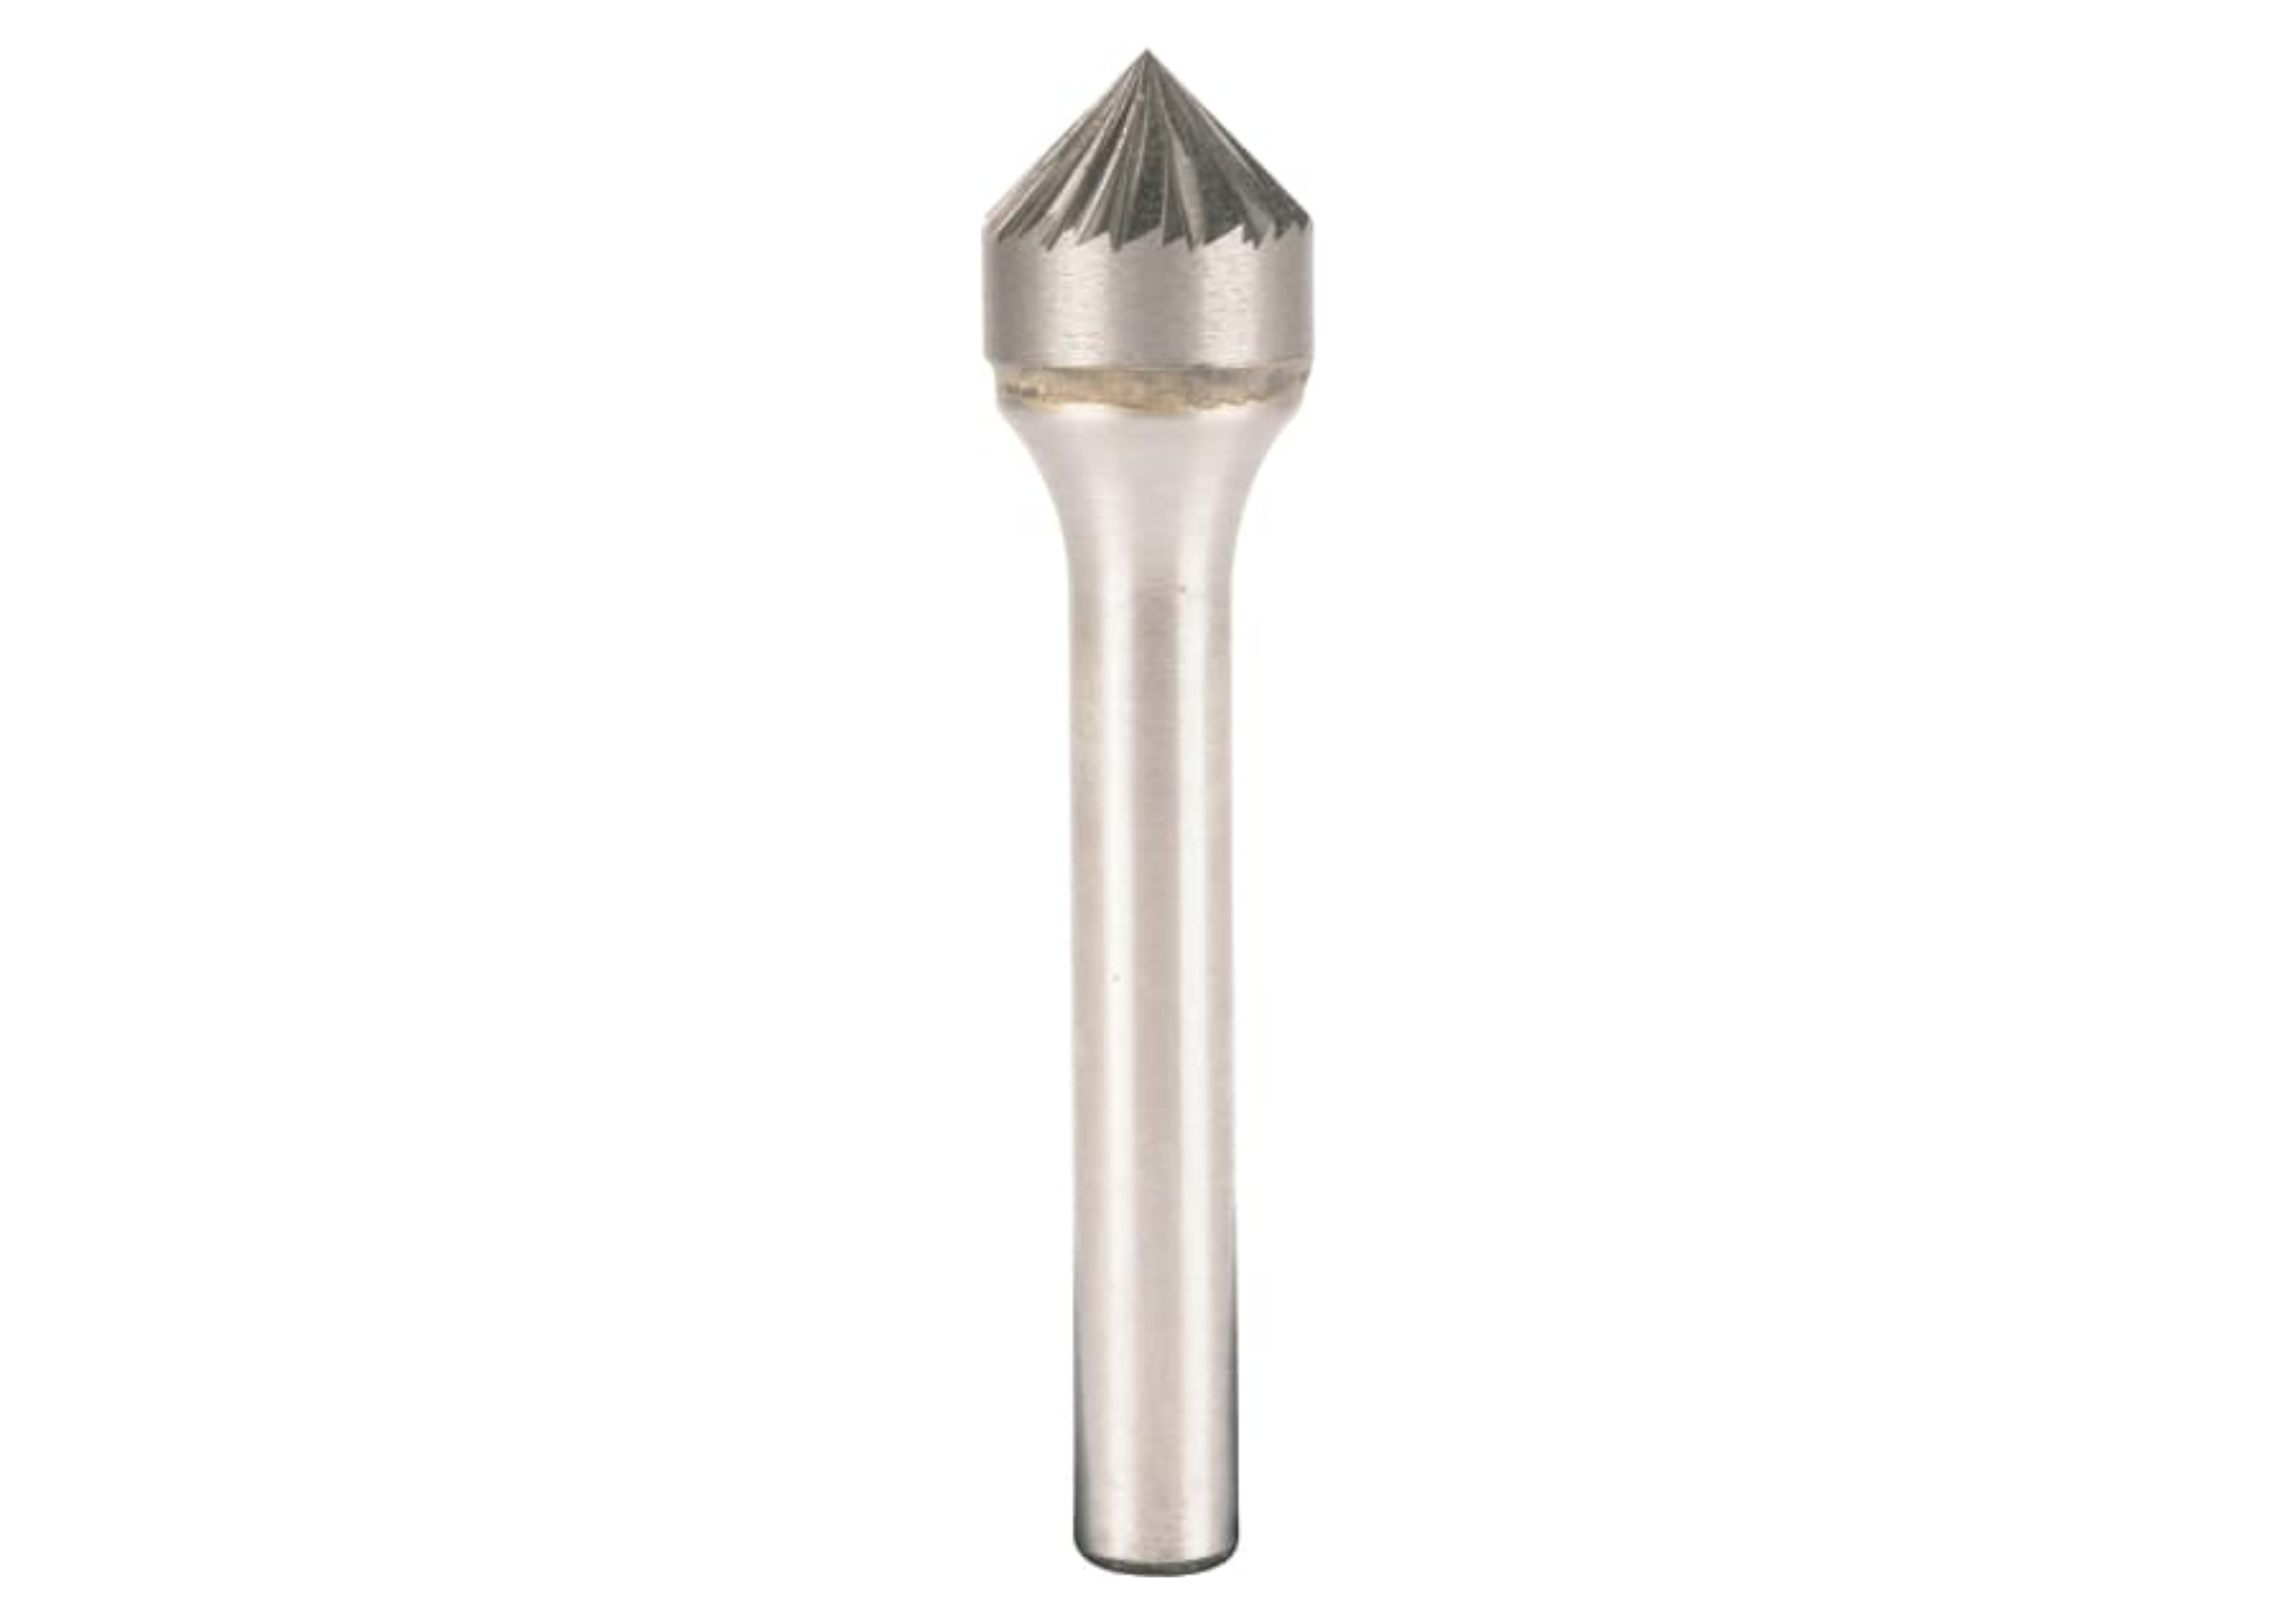 This is an image of our Carbide Burrs